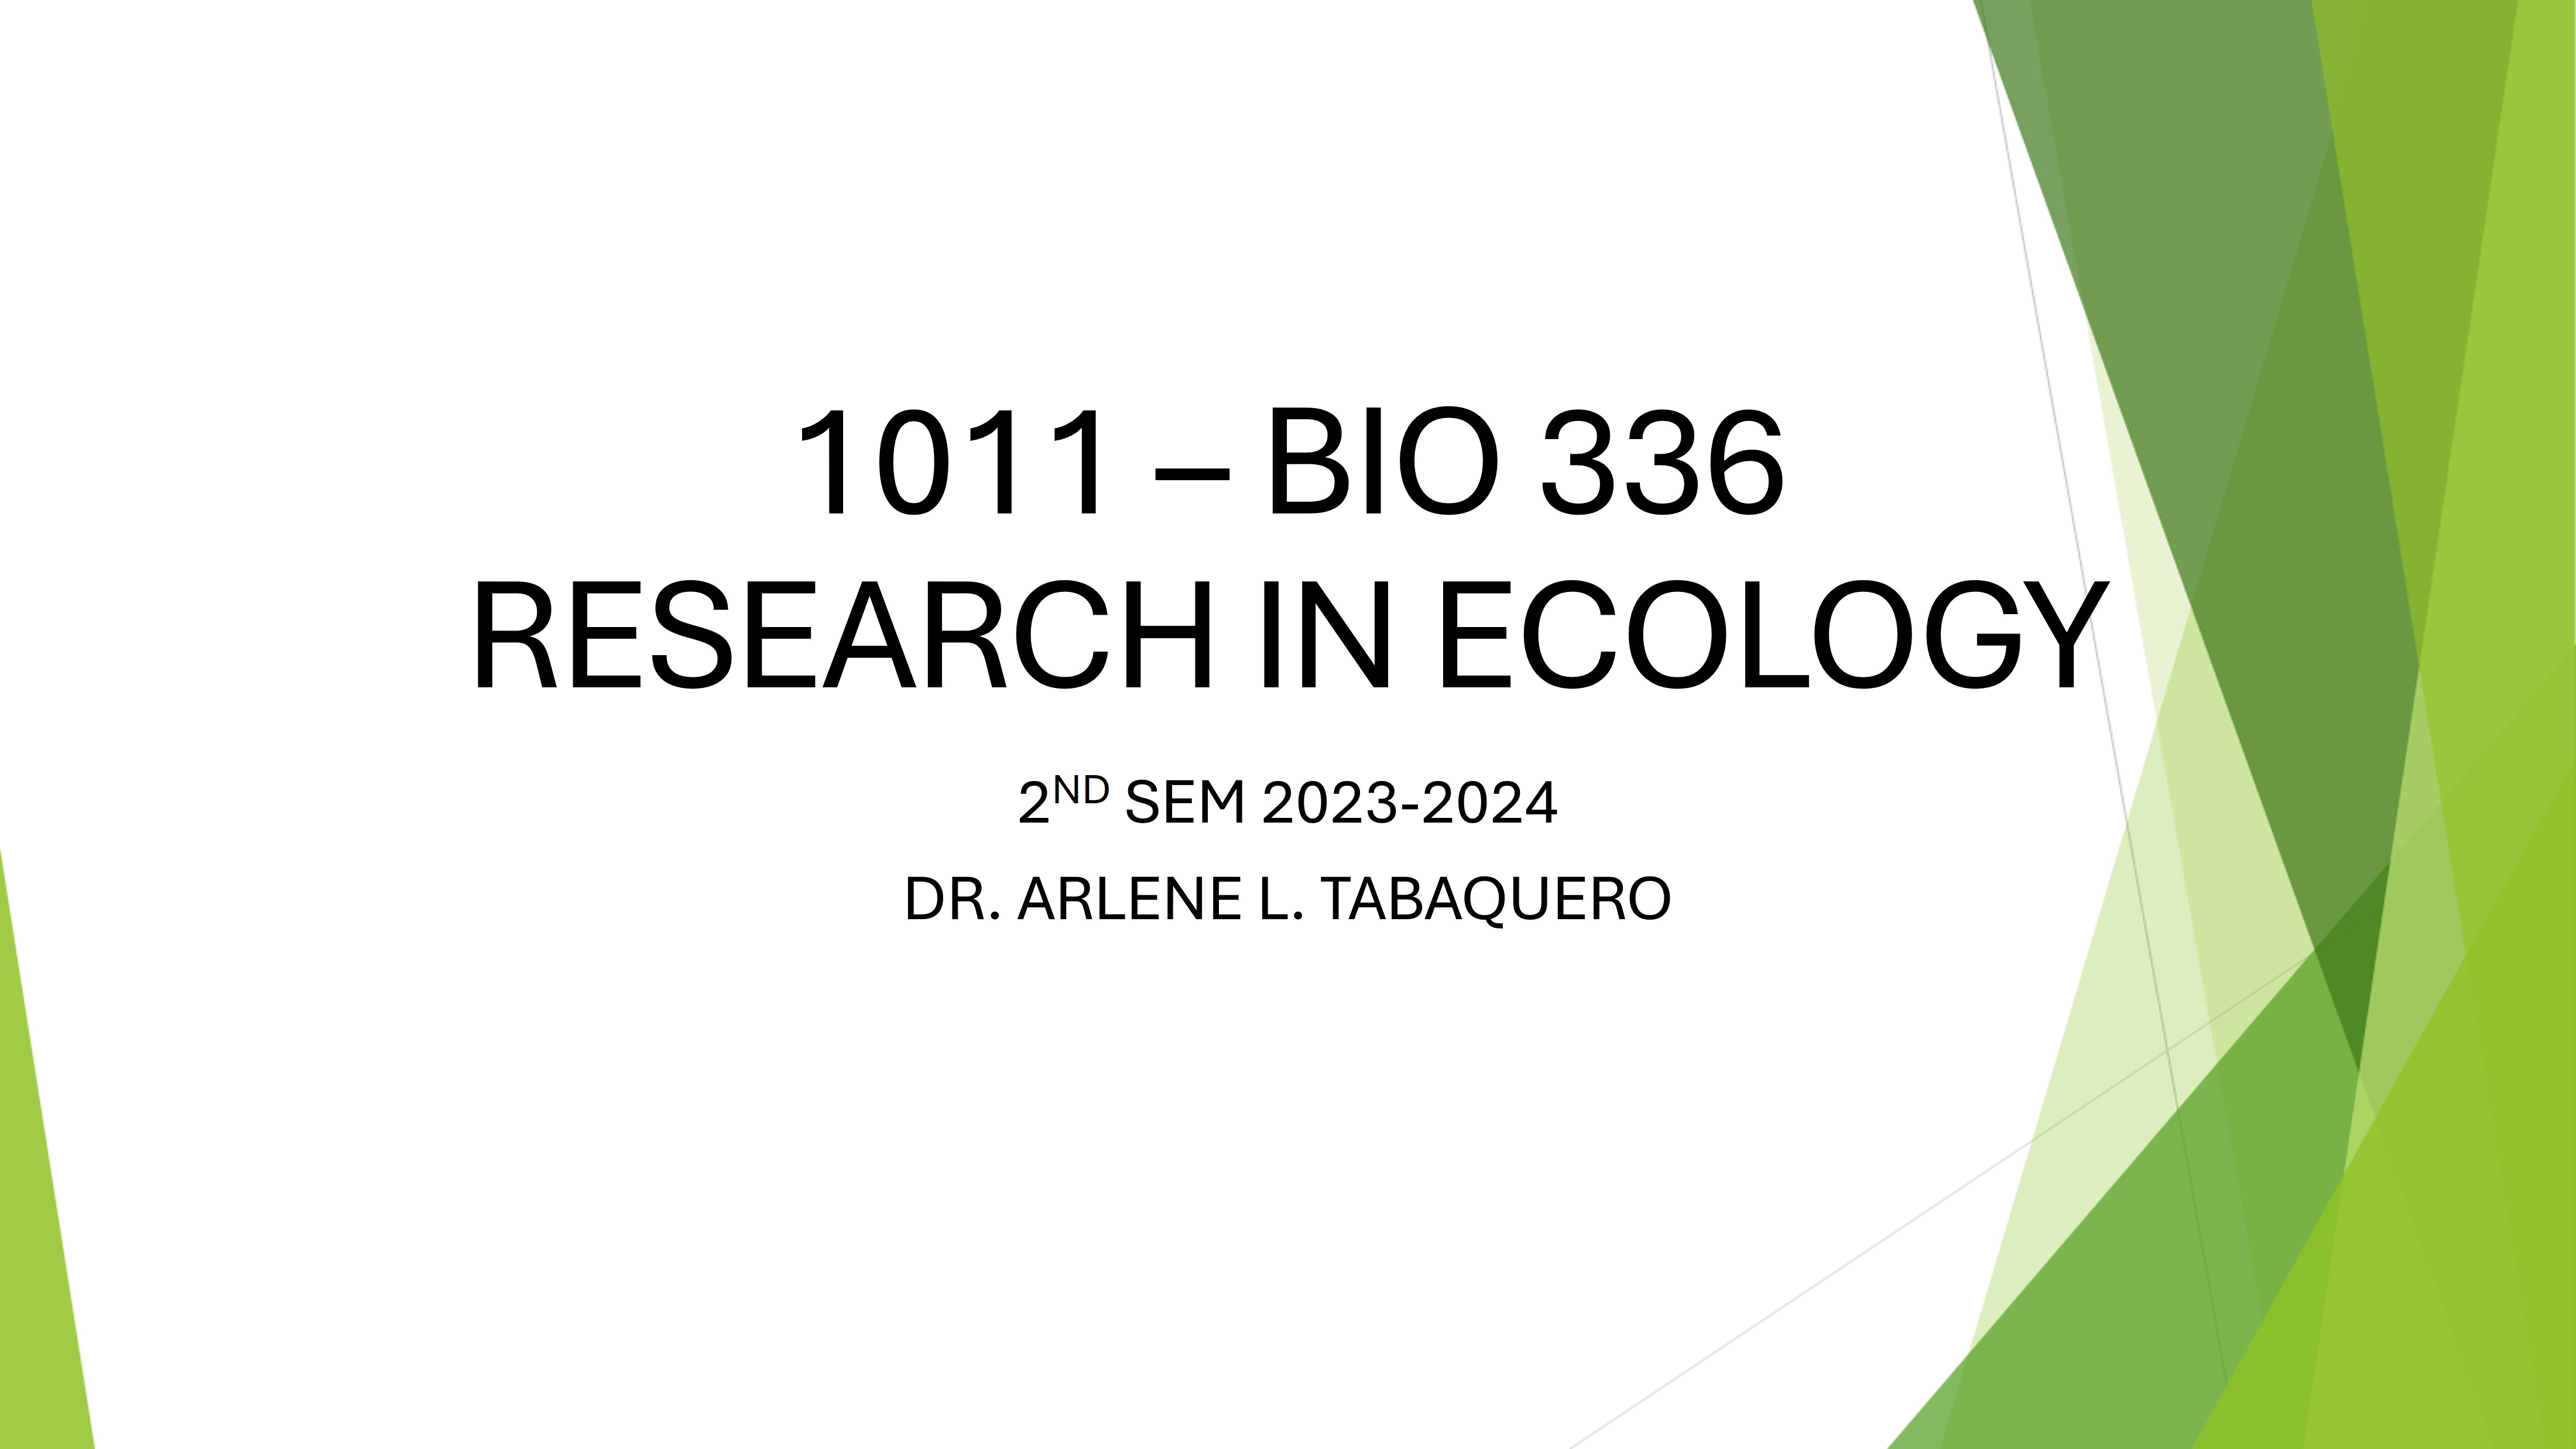 Research in Ecology